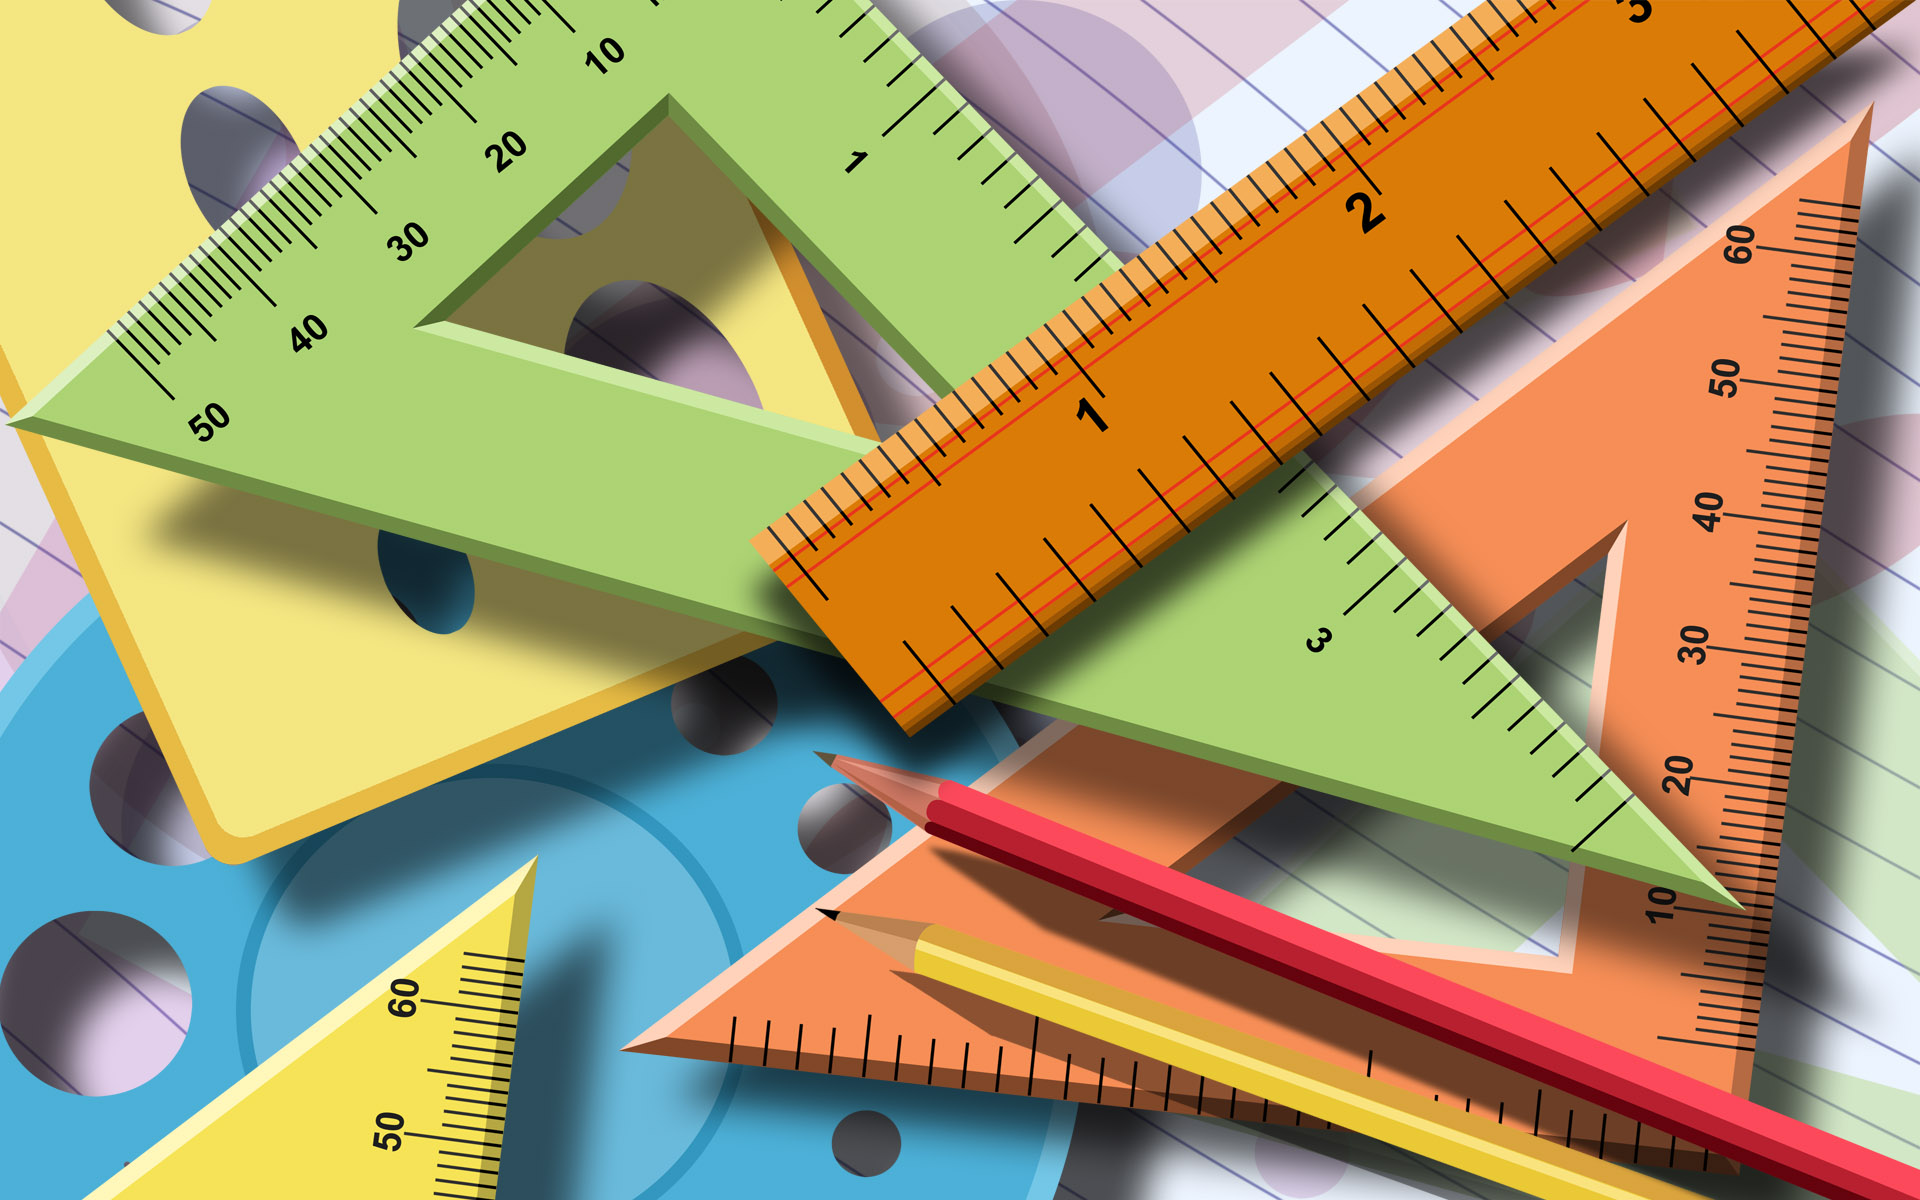 Mathematical-tools-wallpapers 5697 1920x1200.jpg